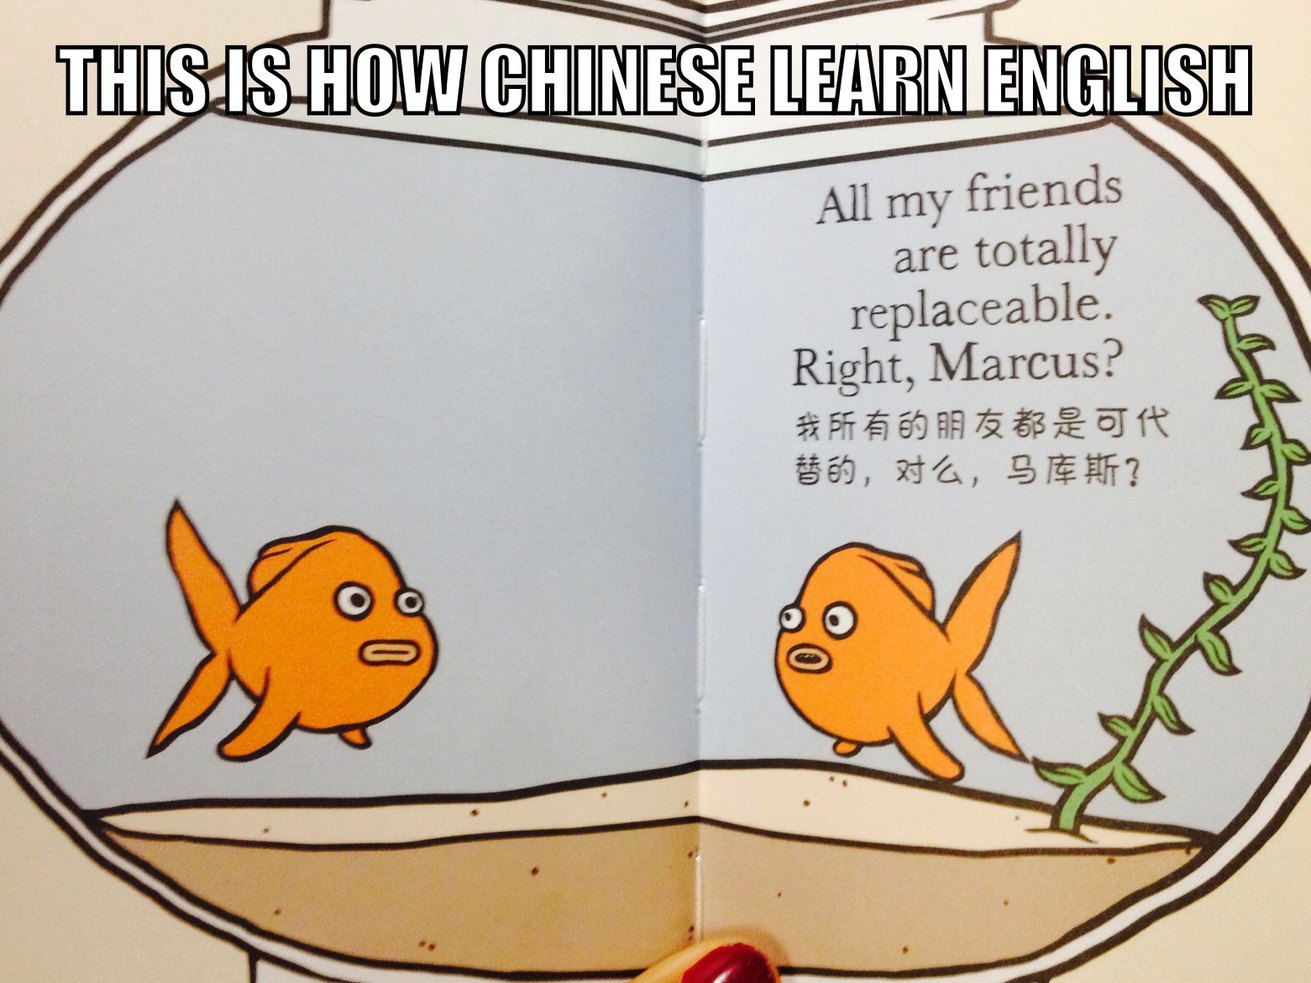 How Chinese learn English - meme